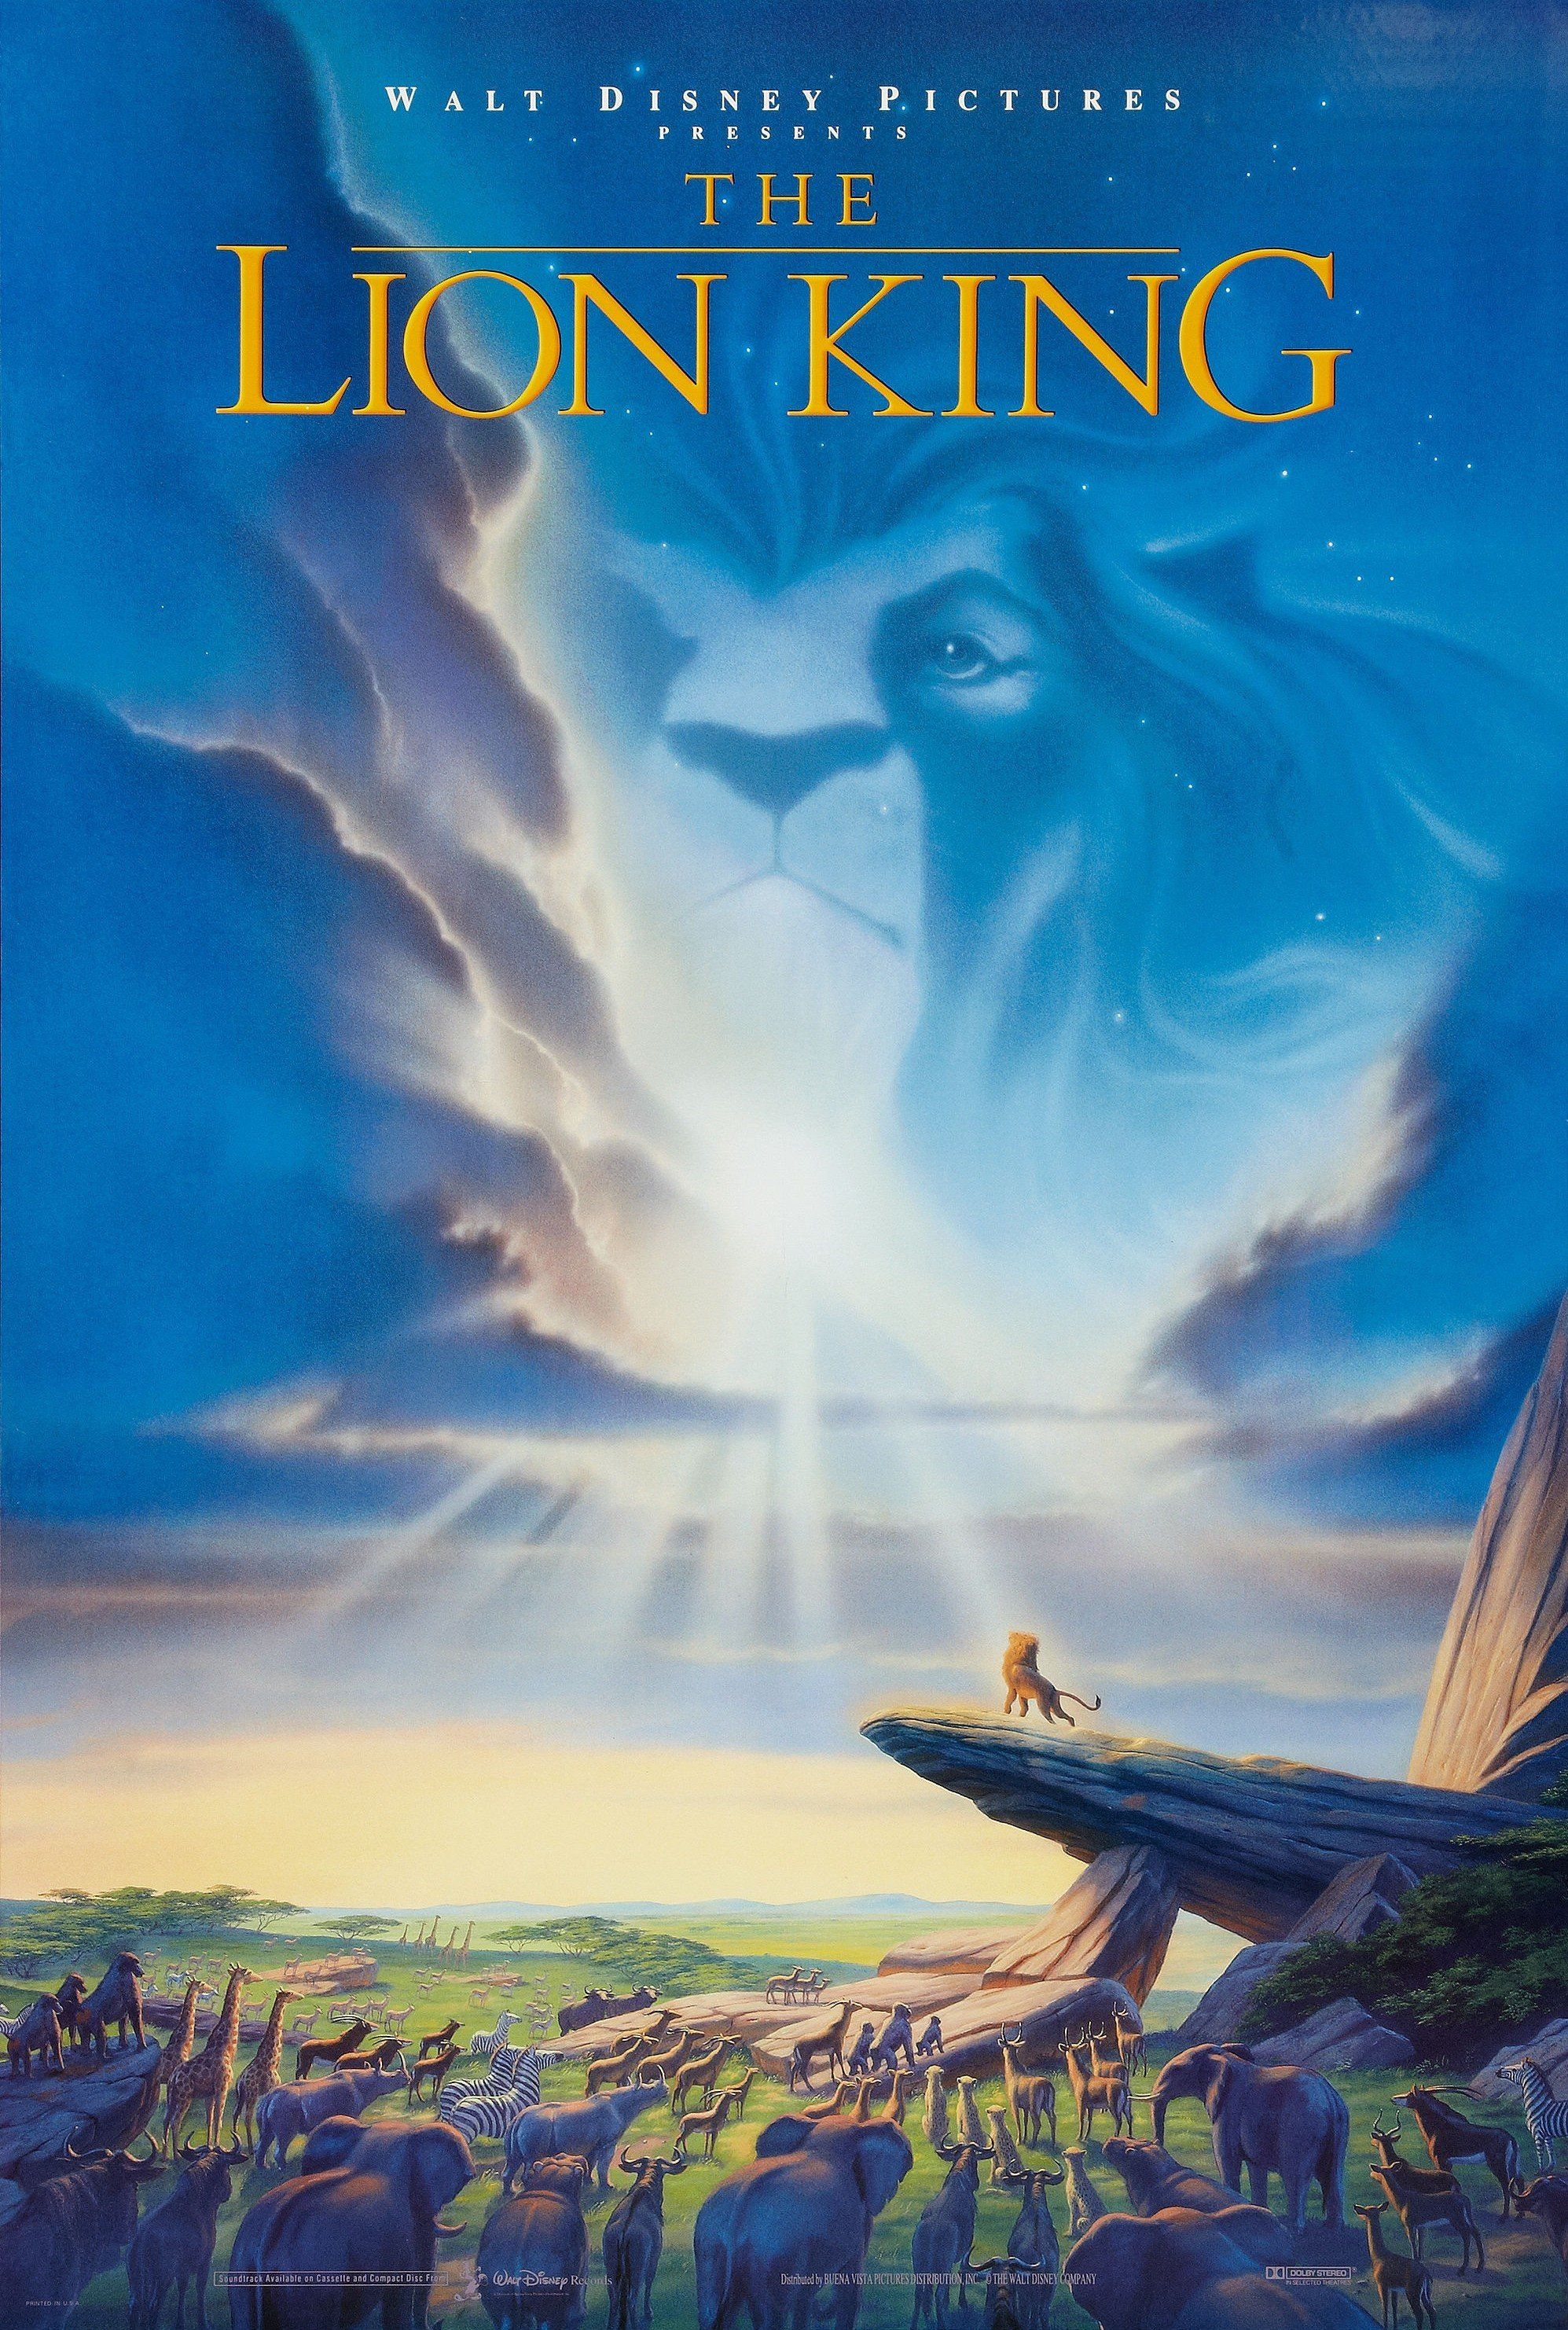 Mufasa in the clouds watches over Pride Rock in The Lion King Official Movie Poster